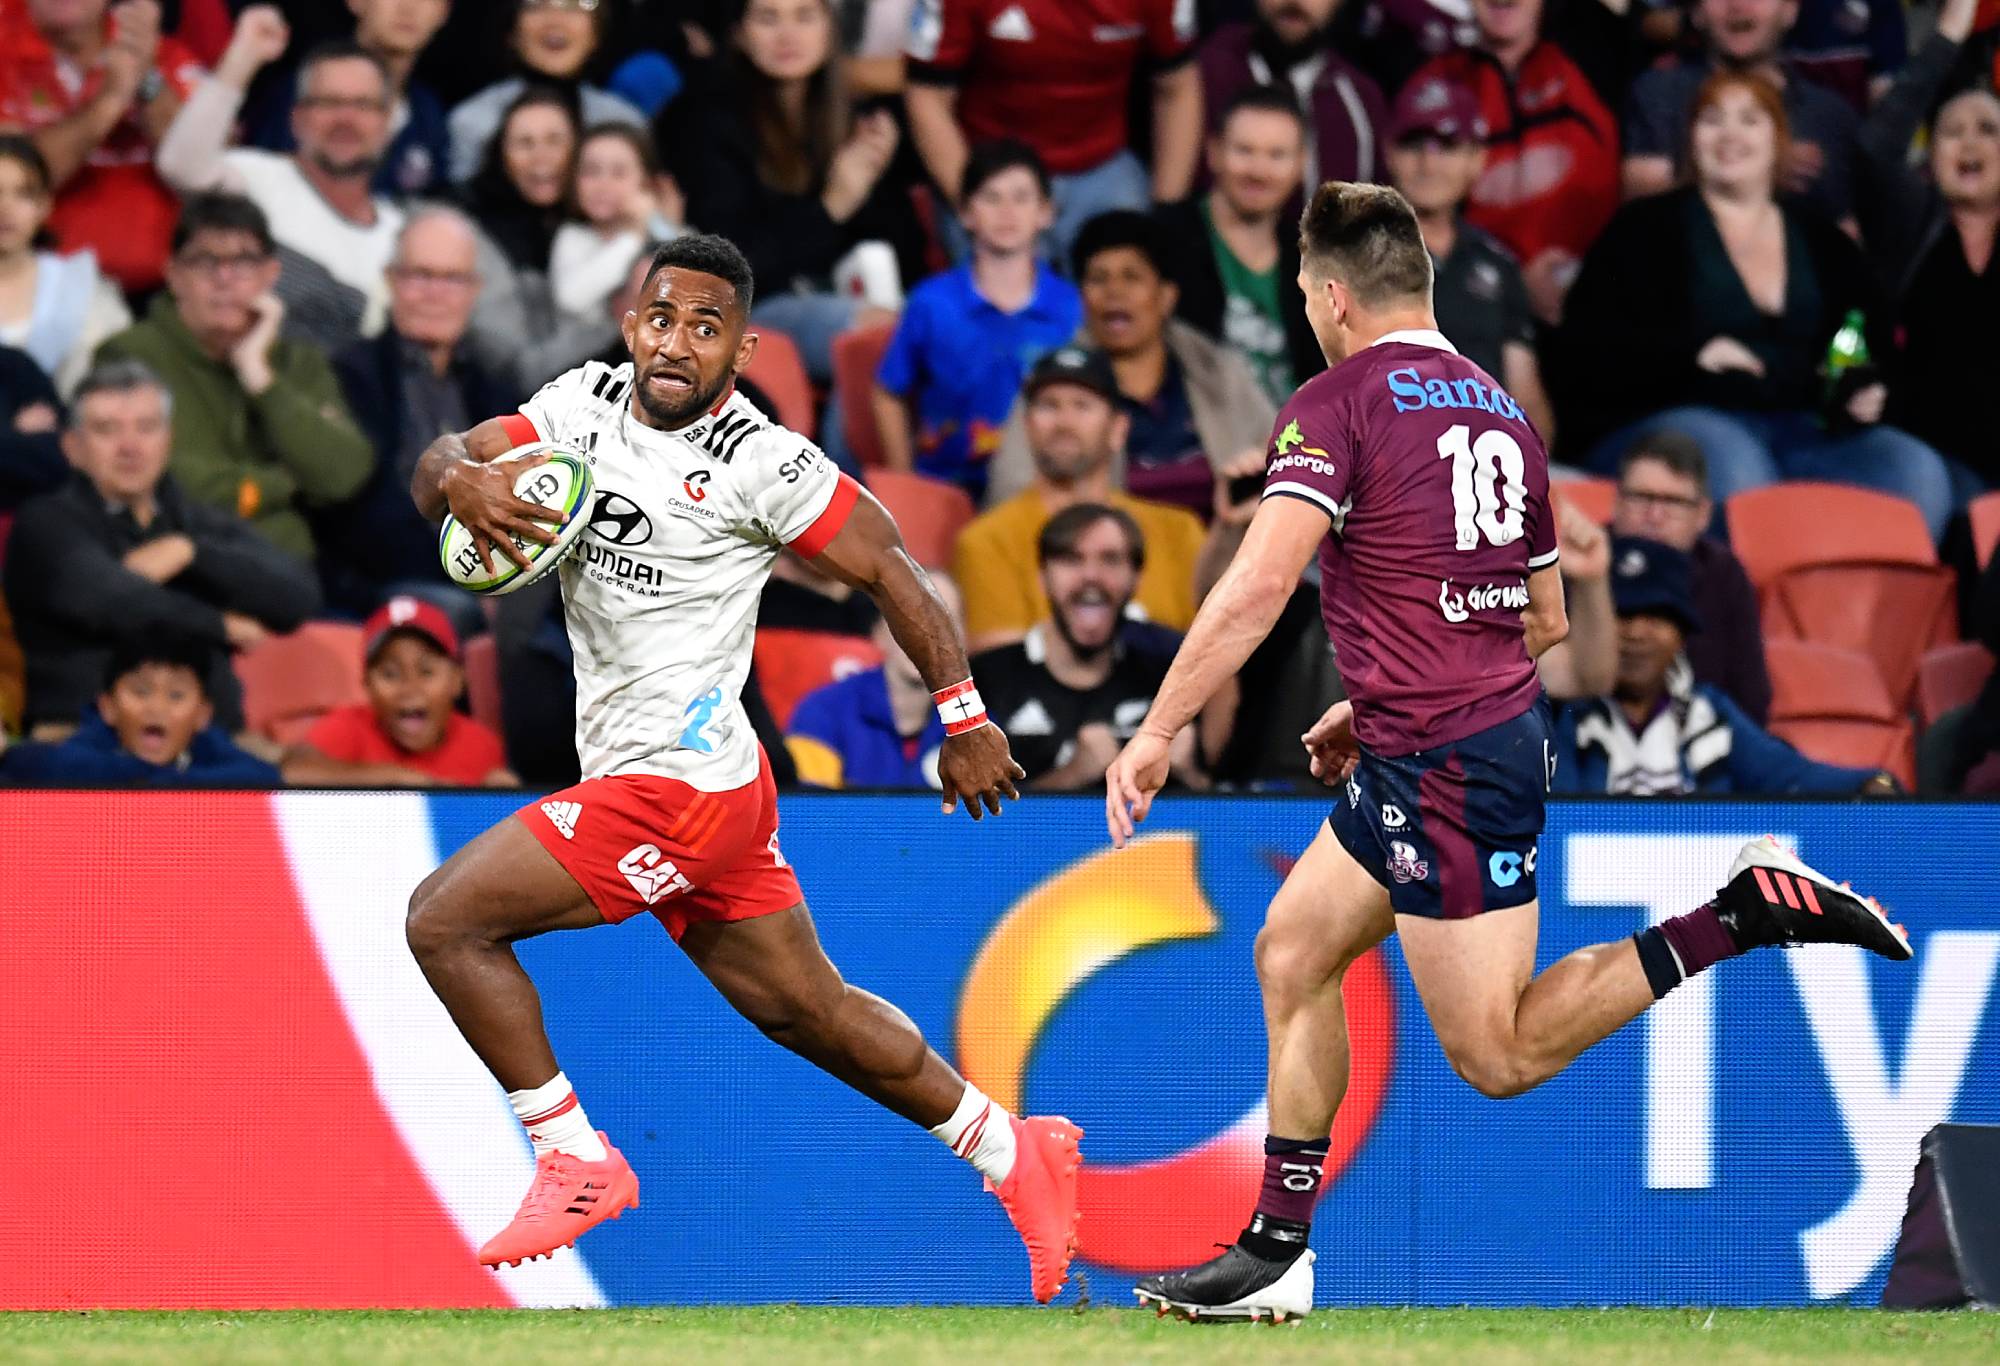 Sevu Reece of the Crusaders runs with the ball before scoring a try during the round two Super Rugby Trans-Tasman match between the Queensland Reds and the Crusaders at Suncorp Stadium on May 22, 2021 in Brisbane, Australia. (Photo by Albert Perez/Getty Images)